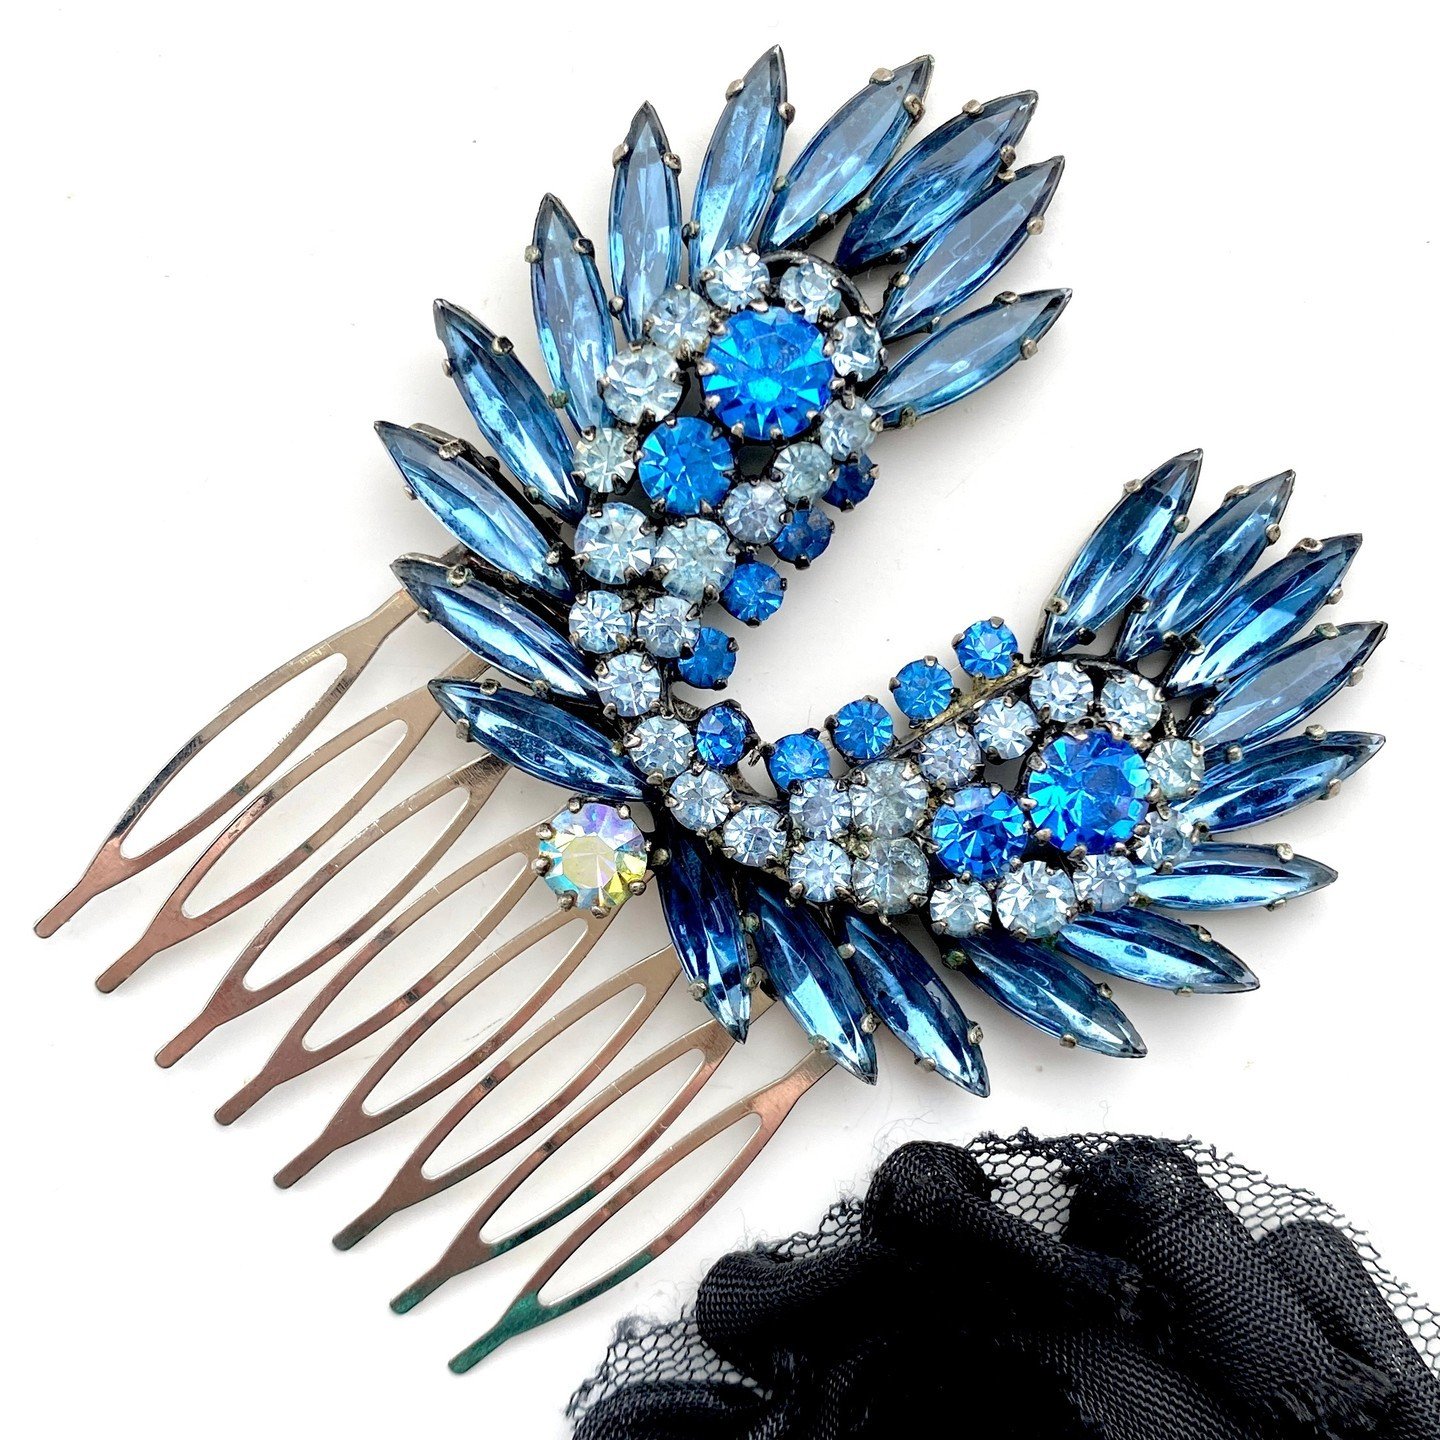 This vintage hair comb would be a lovely choice as a hair accessory for a wedding guest or anyone with a special event coming up. Made from a genuine piece of vintage jewellery from the 1950s - a claw-setting of sparkling blue rhinestones. Available 